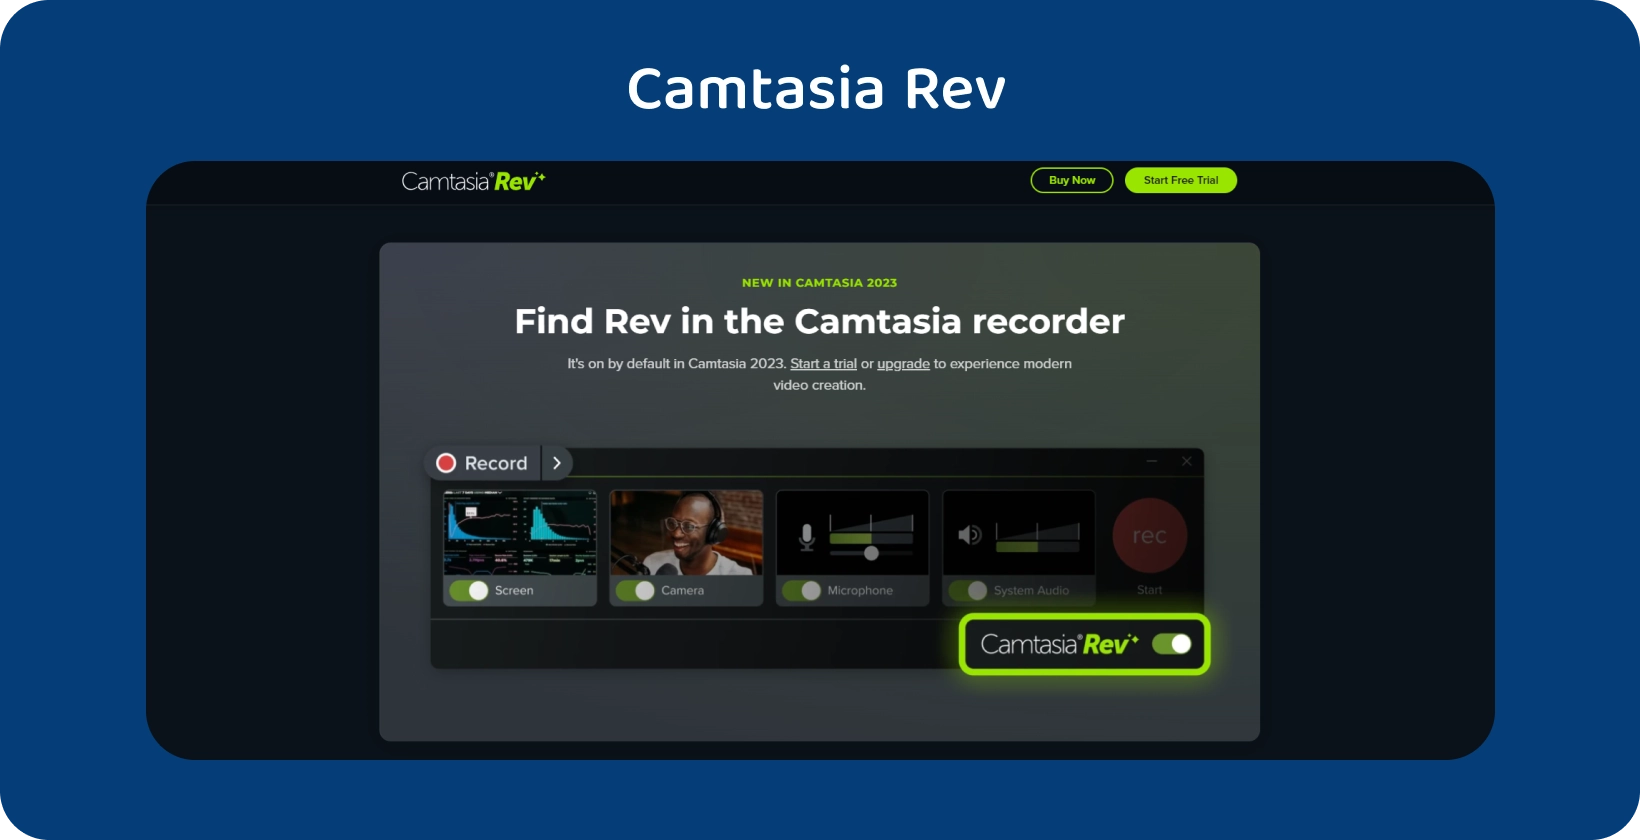 Camtasia Rev's homepage banner, showcasing AI-assisted video creation tools for enhanced video production.